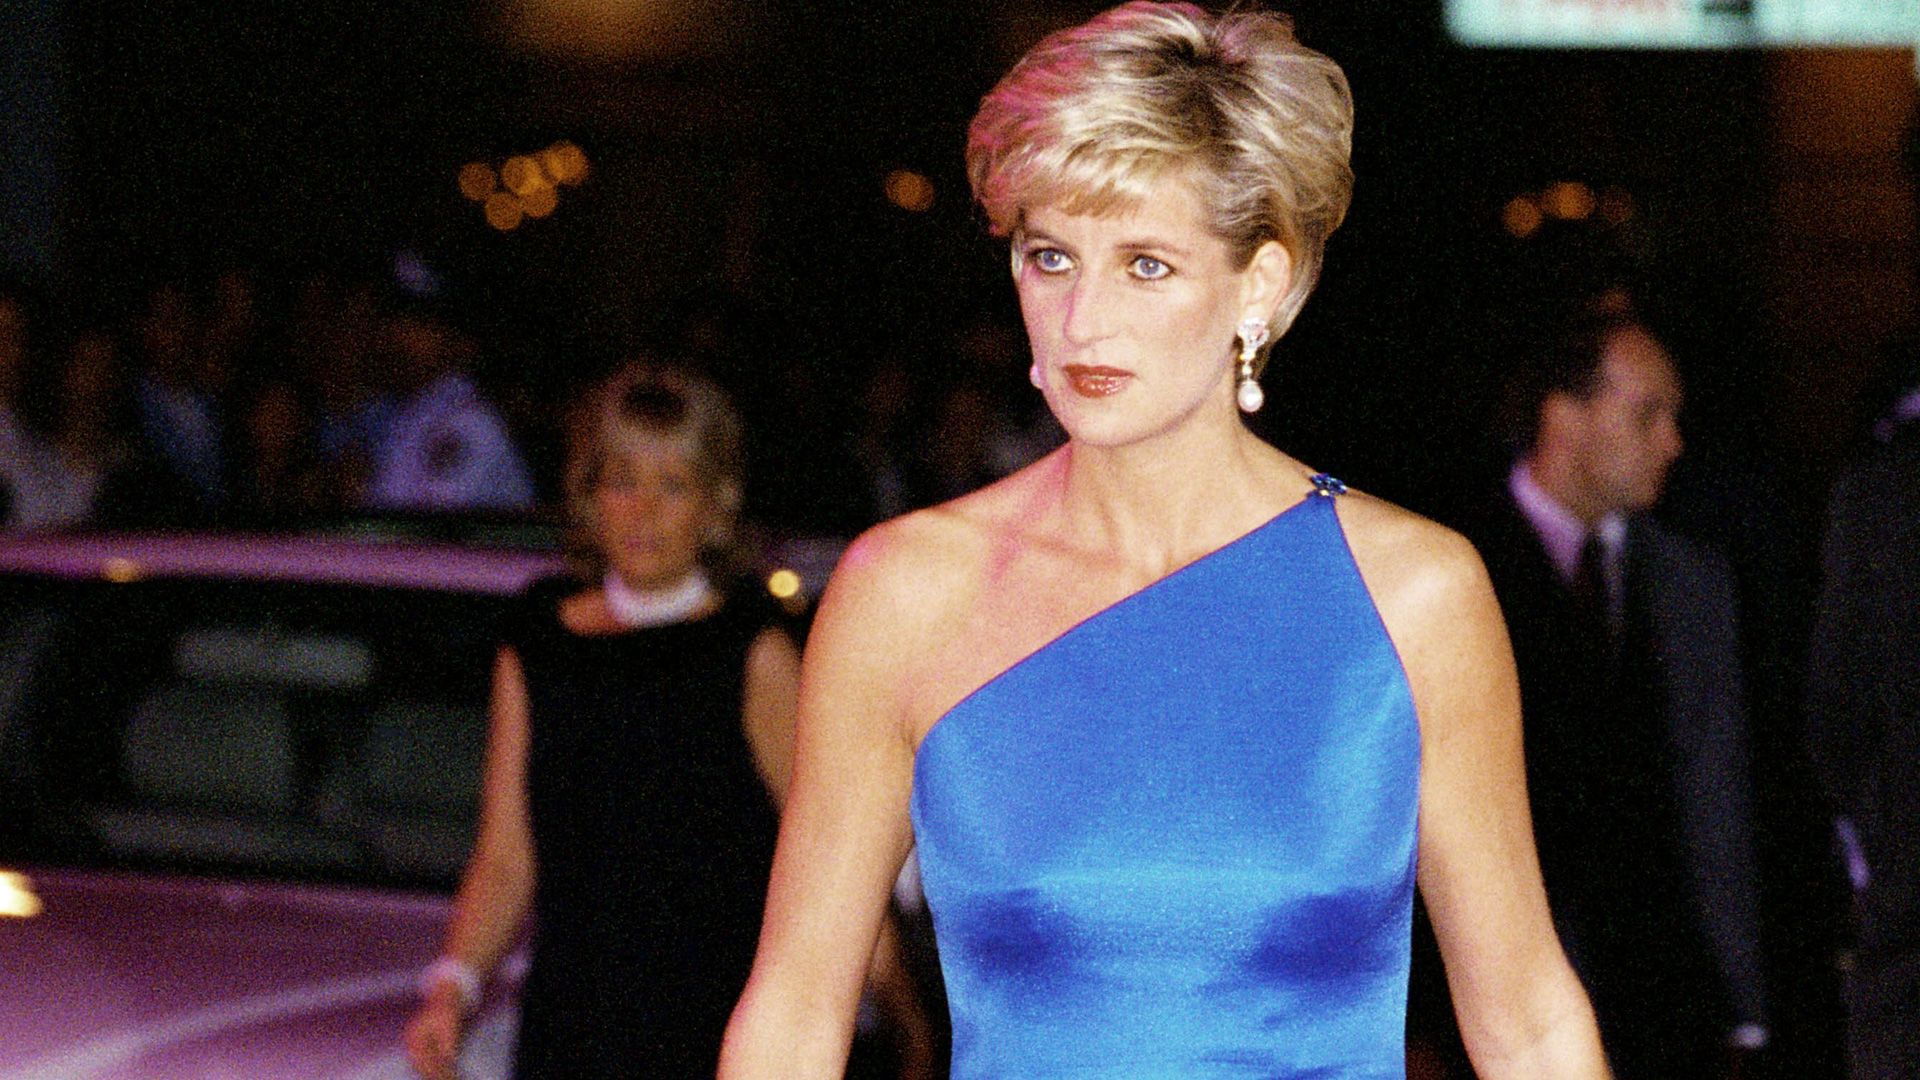 Princess Diana staring at one of the Paparazzi guys 1996